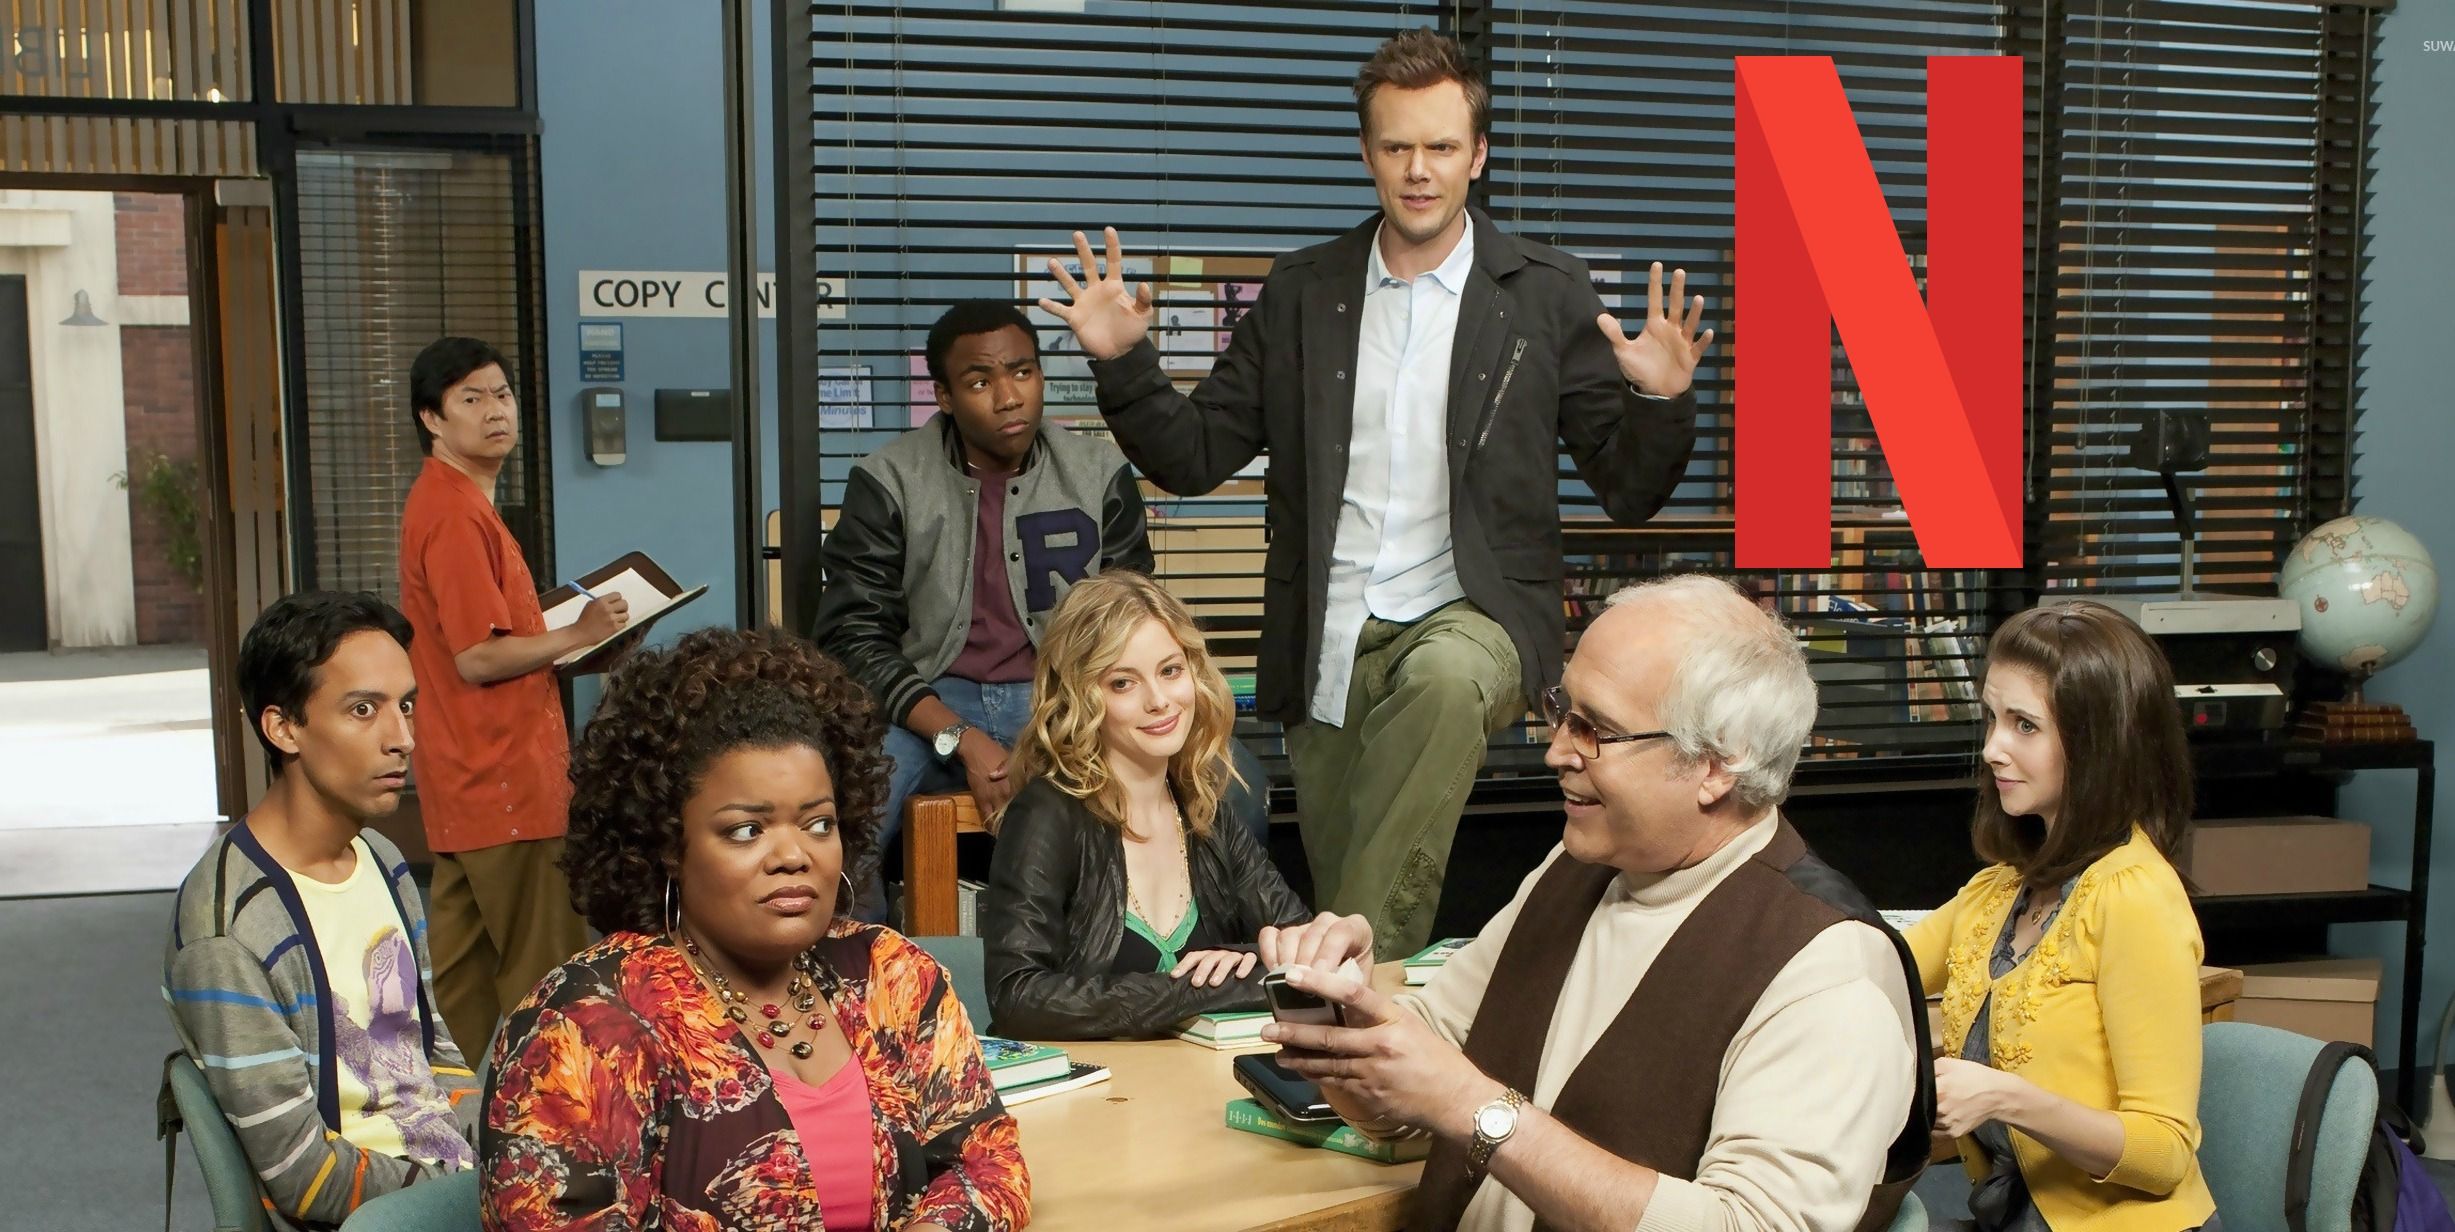 Community Movie Could Be Made By Netflix, Suggests Joe Russo